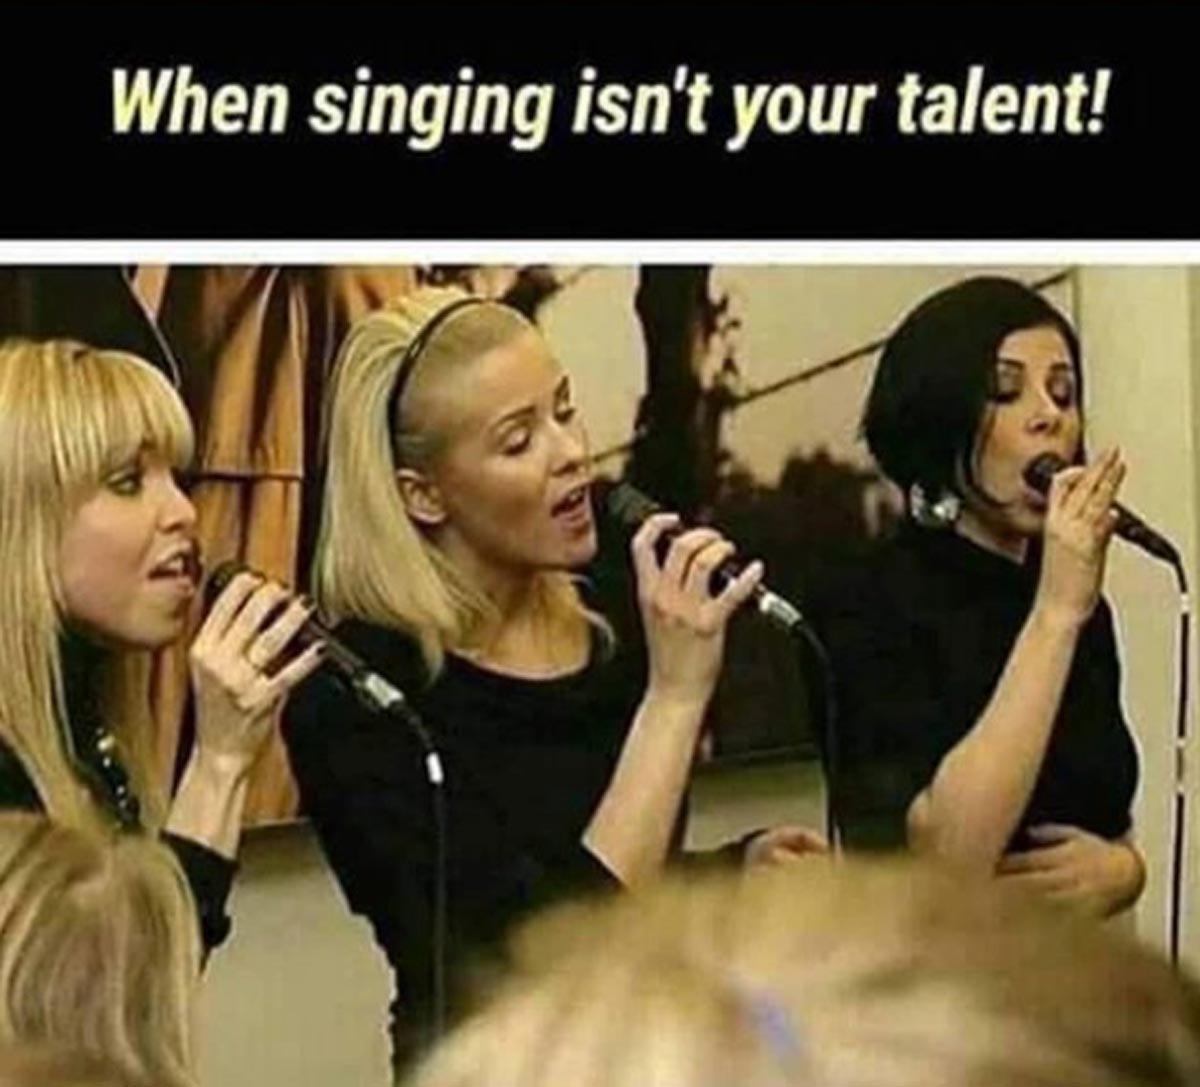 funny sex memes - demotivational posters - When singing isn't your talent!